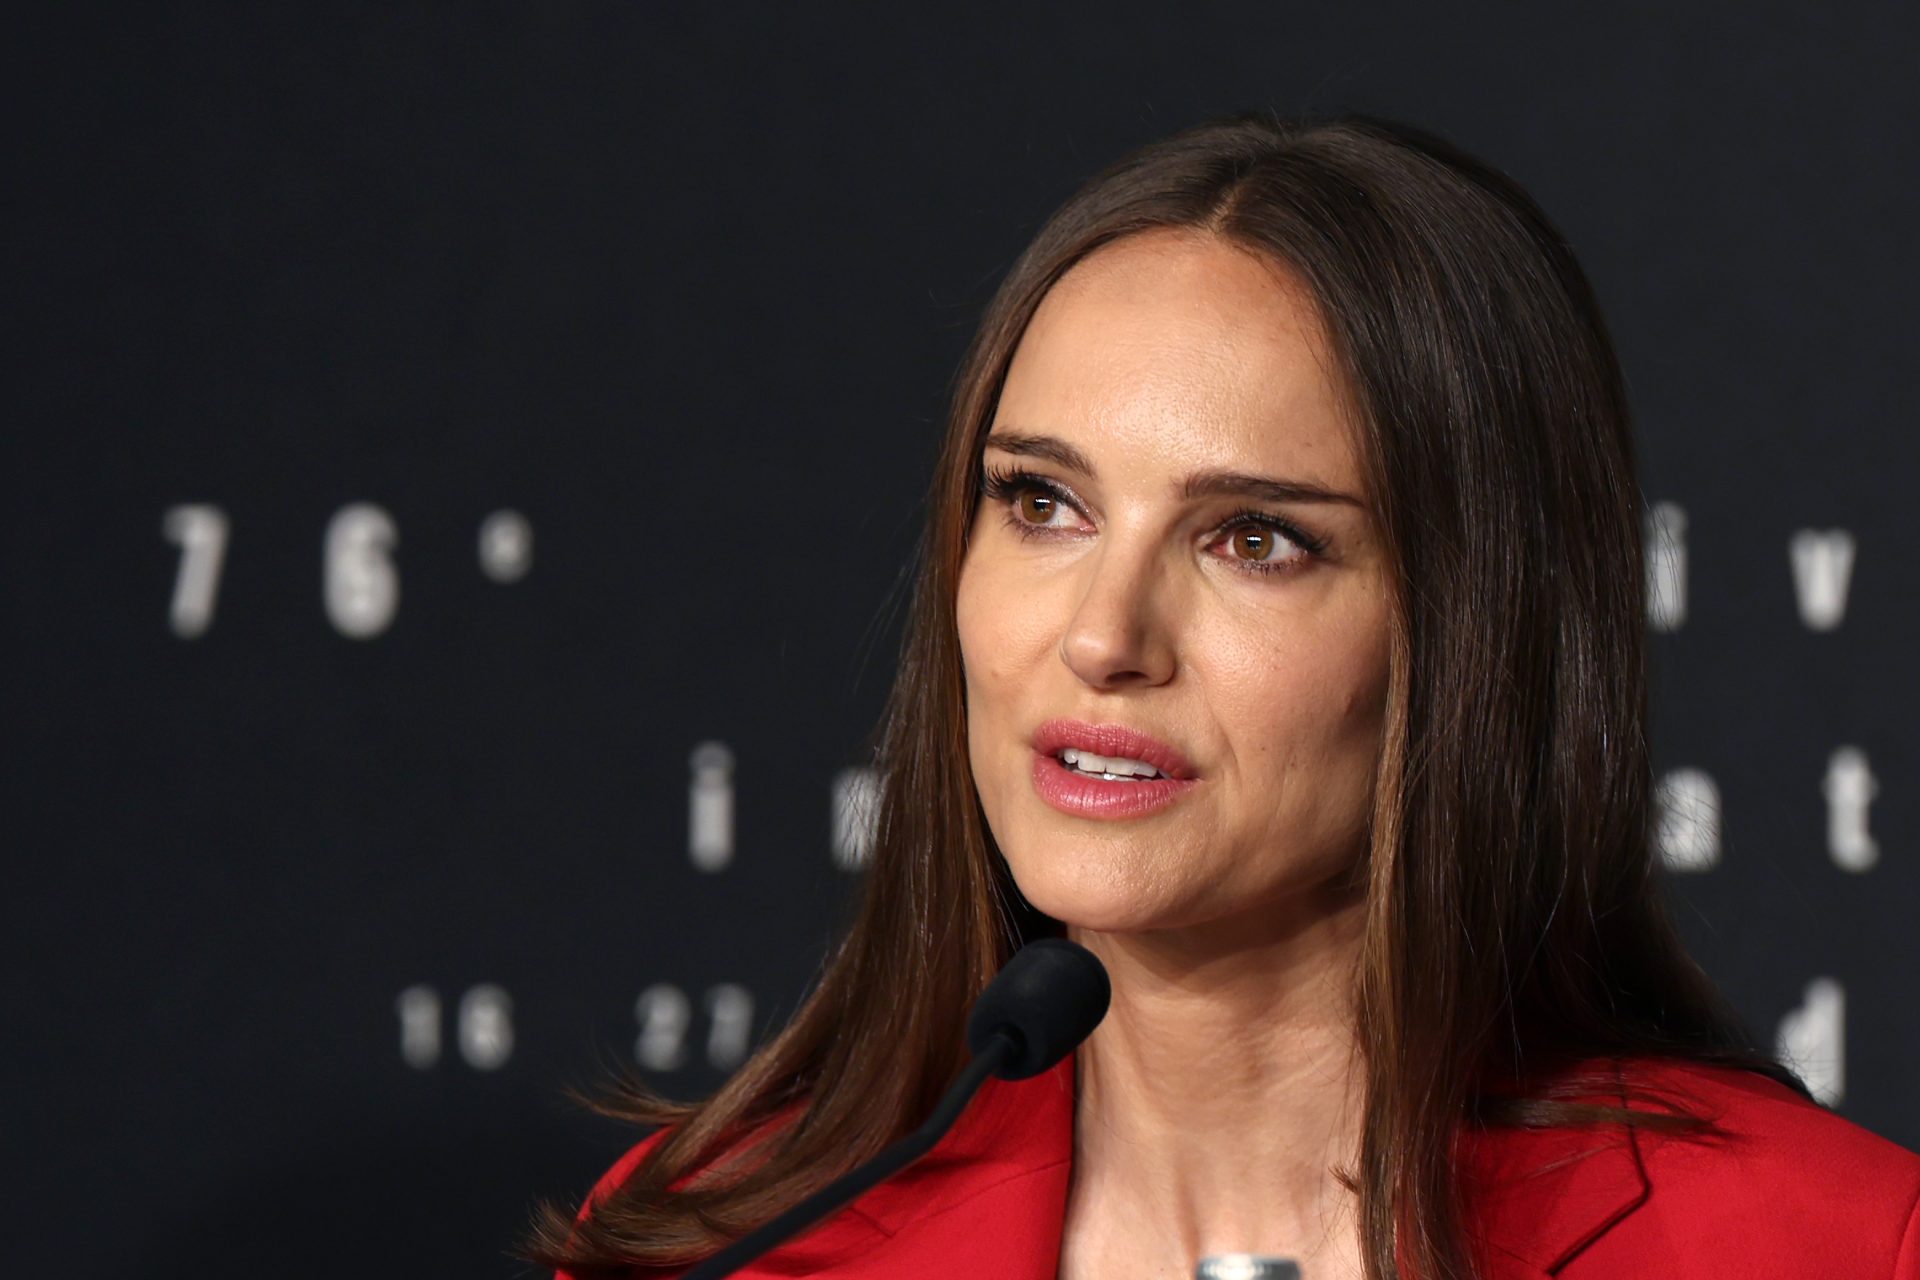 Natalie Portman: “ I am in horror at these barbaric acts”